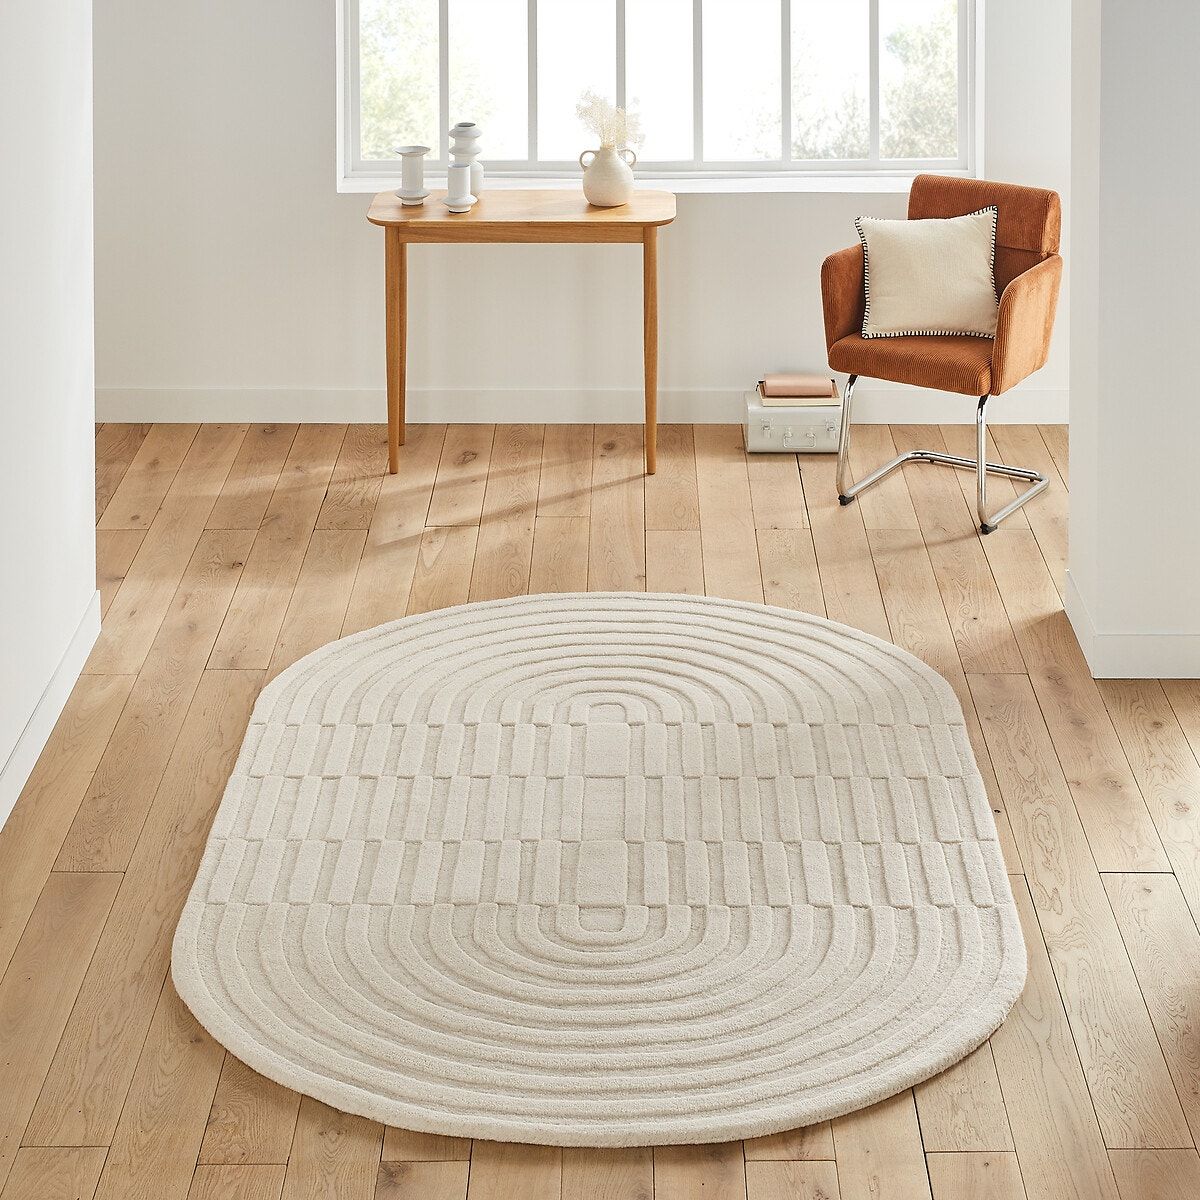 Malko Oval Wool Rug La Redoute Interieurs | La Redoute With Oval Rugs (View 10 of 15)